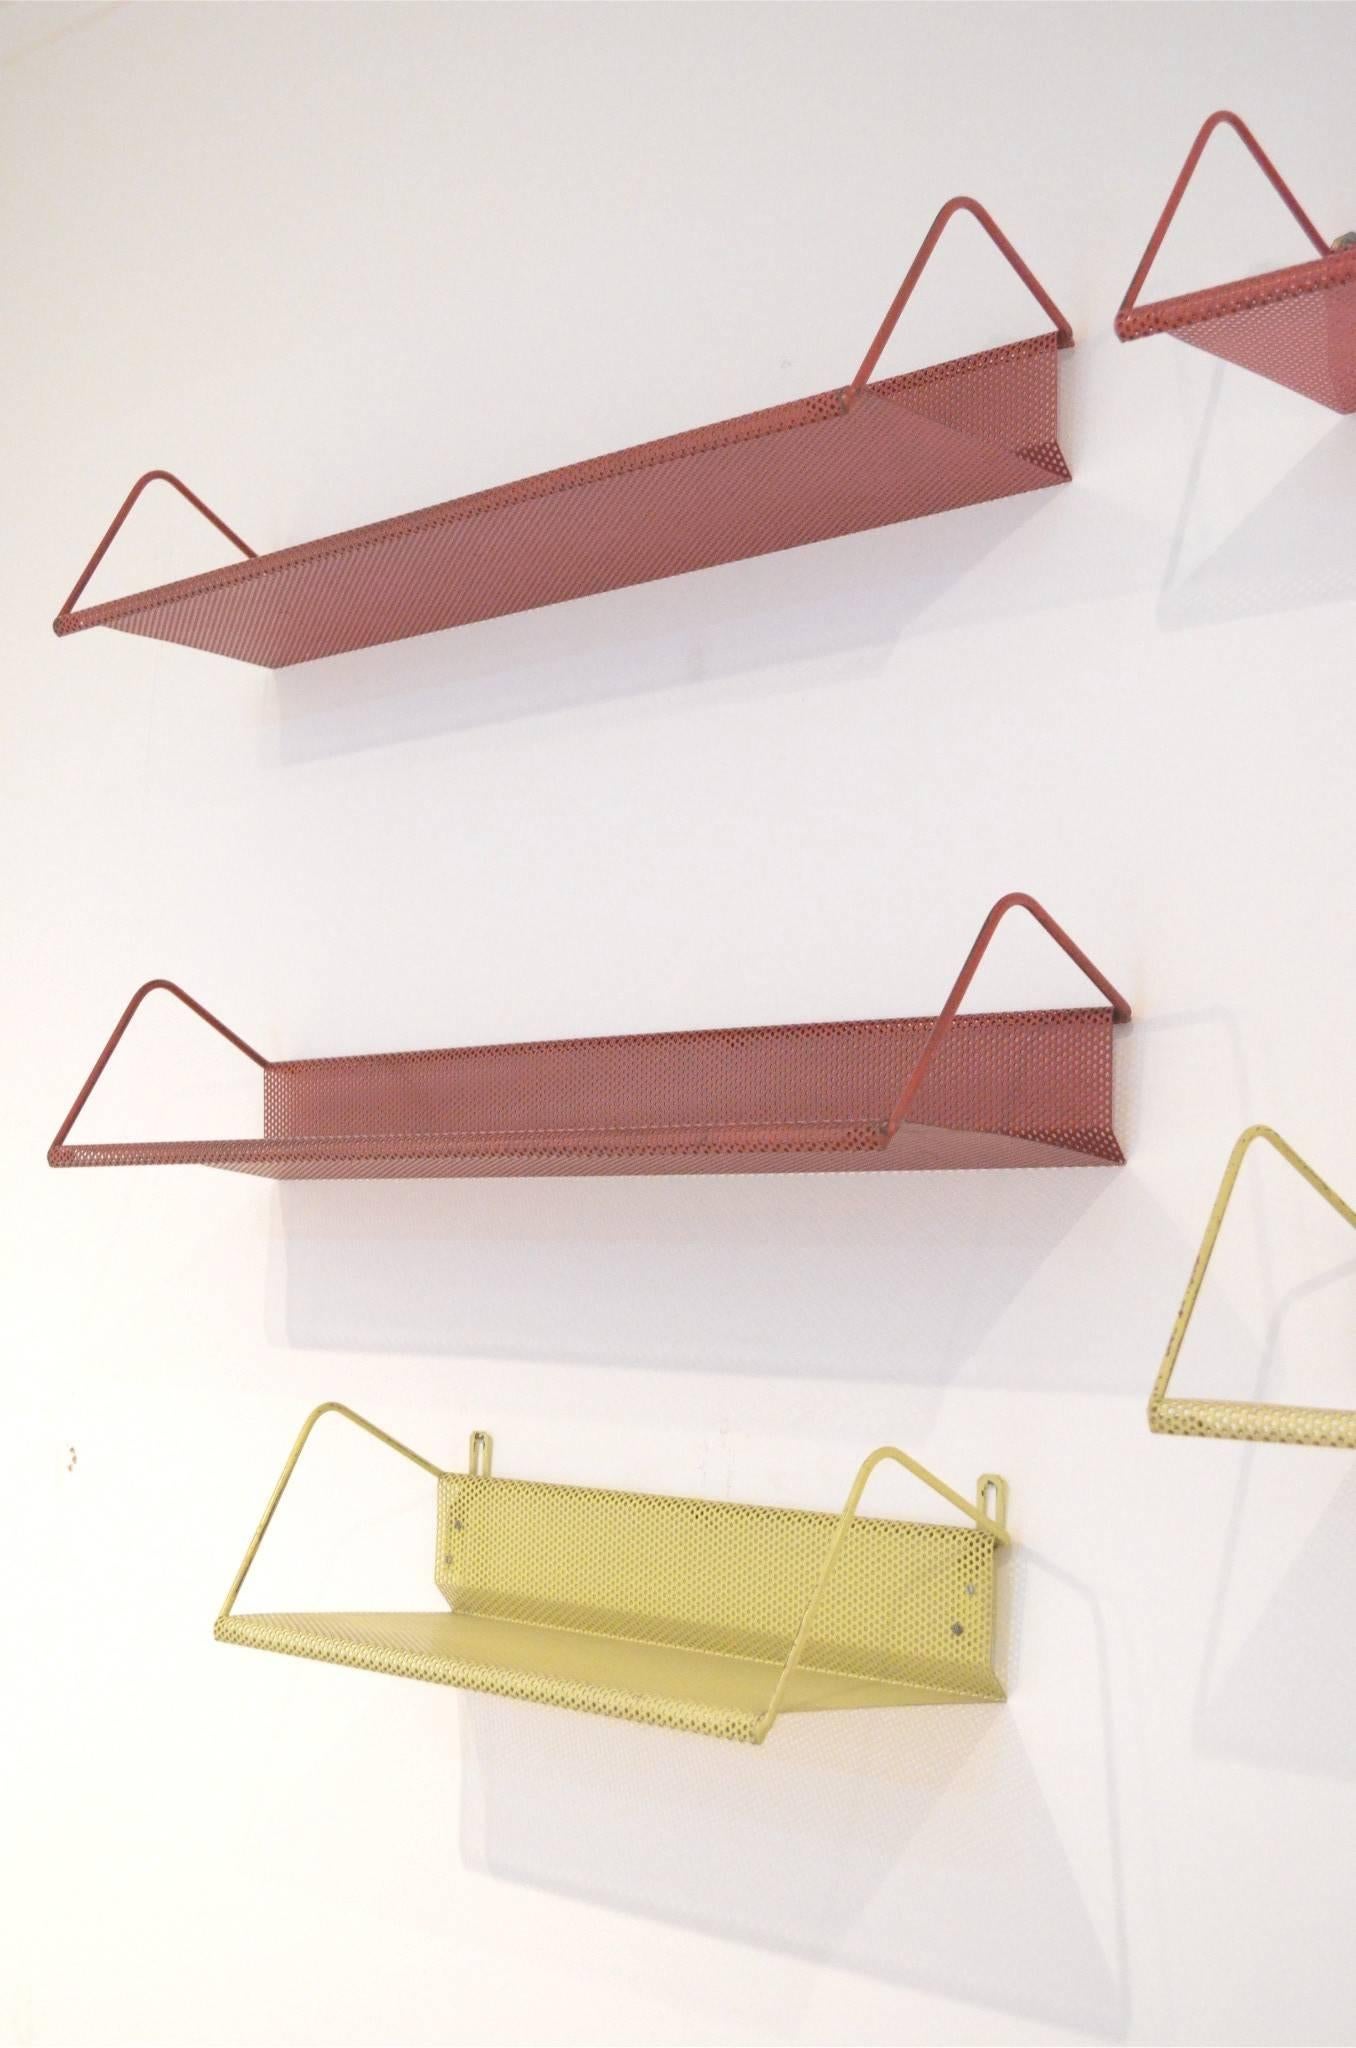 Rare and large set of eight tricolor metal shelving units from Mathieu Mate´got for Artimeta. Planks come in black/ yellow/ red.

Dimensions in cm:
19.5 x 50 x 15 cm.